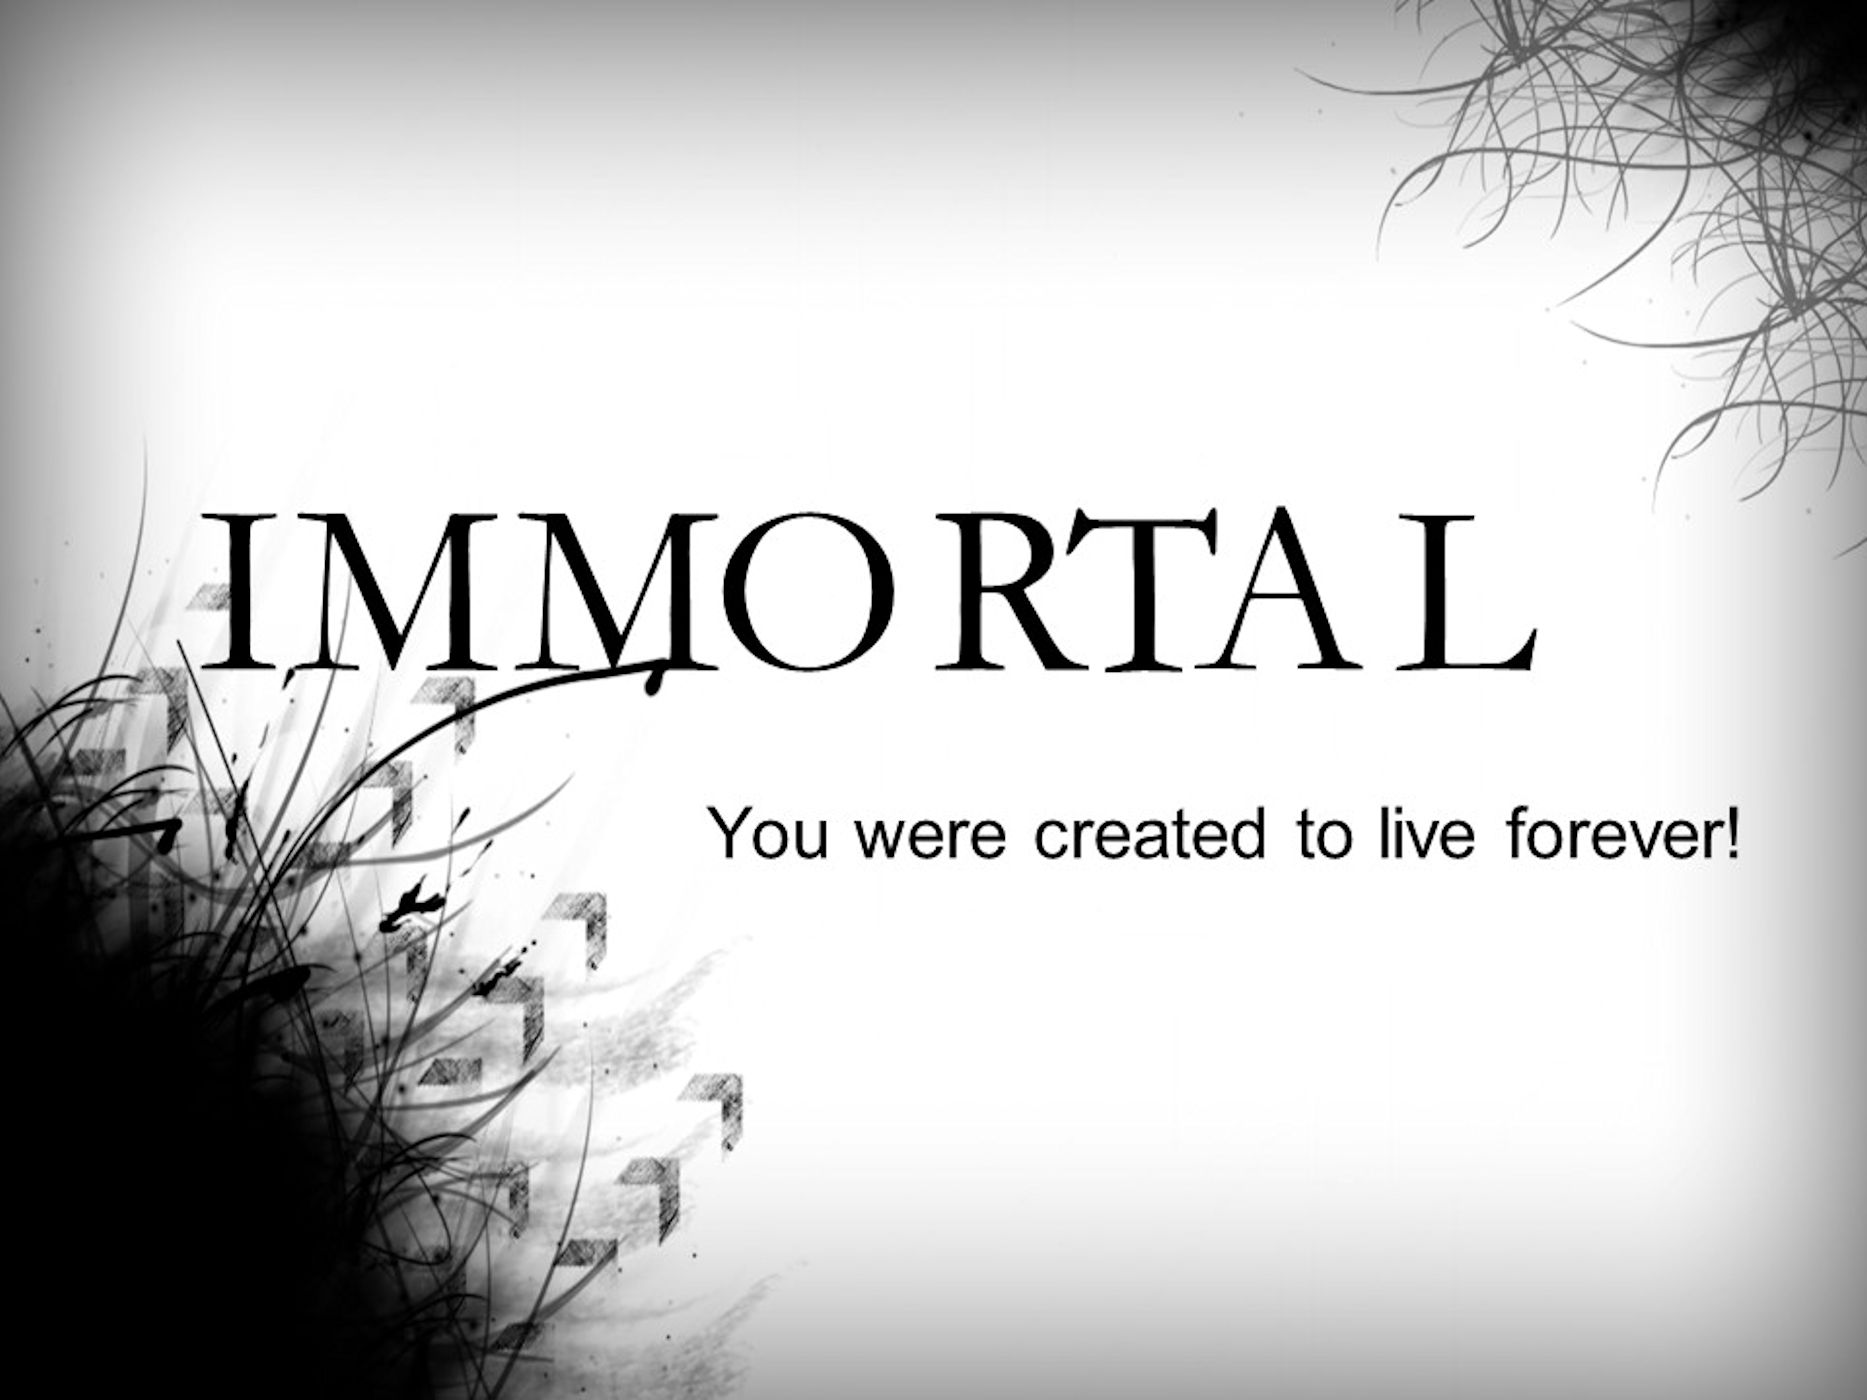 You are Immortal - Andrew Kabbani